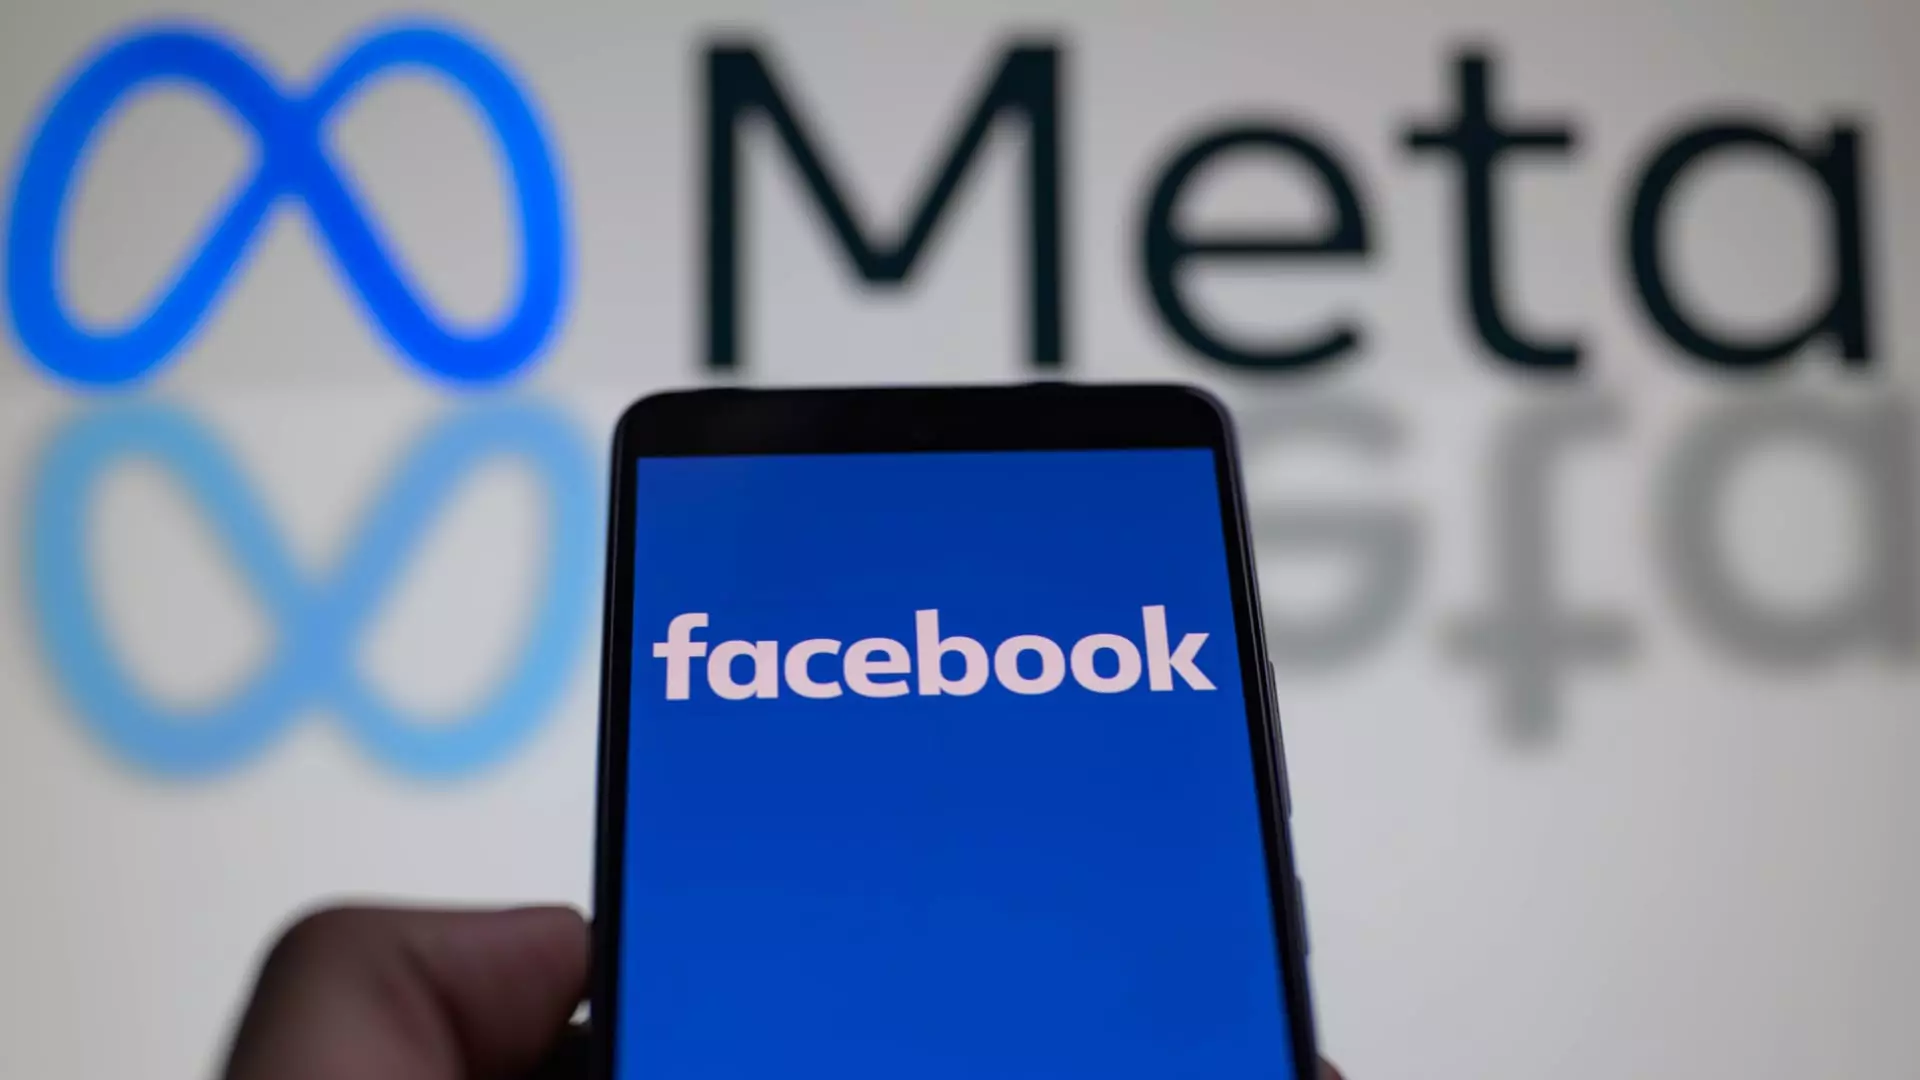 Meta Platforms: What Investors Need to Know Before Earnings Report